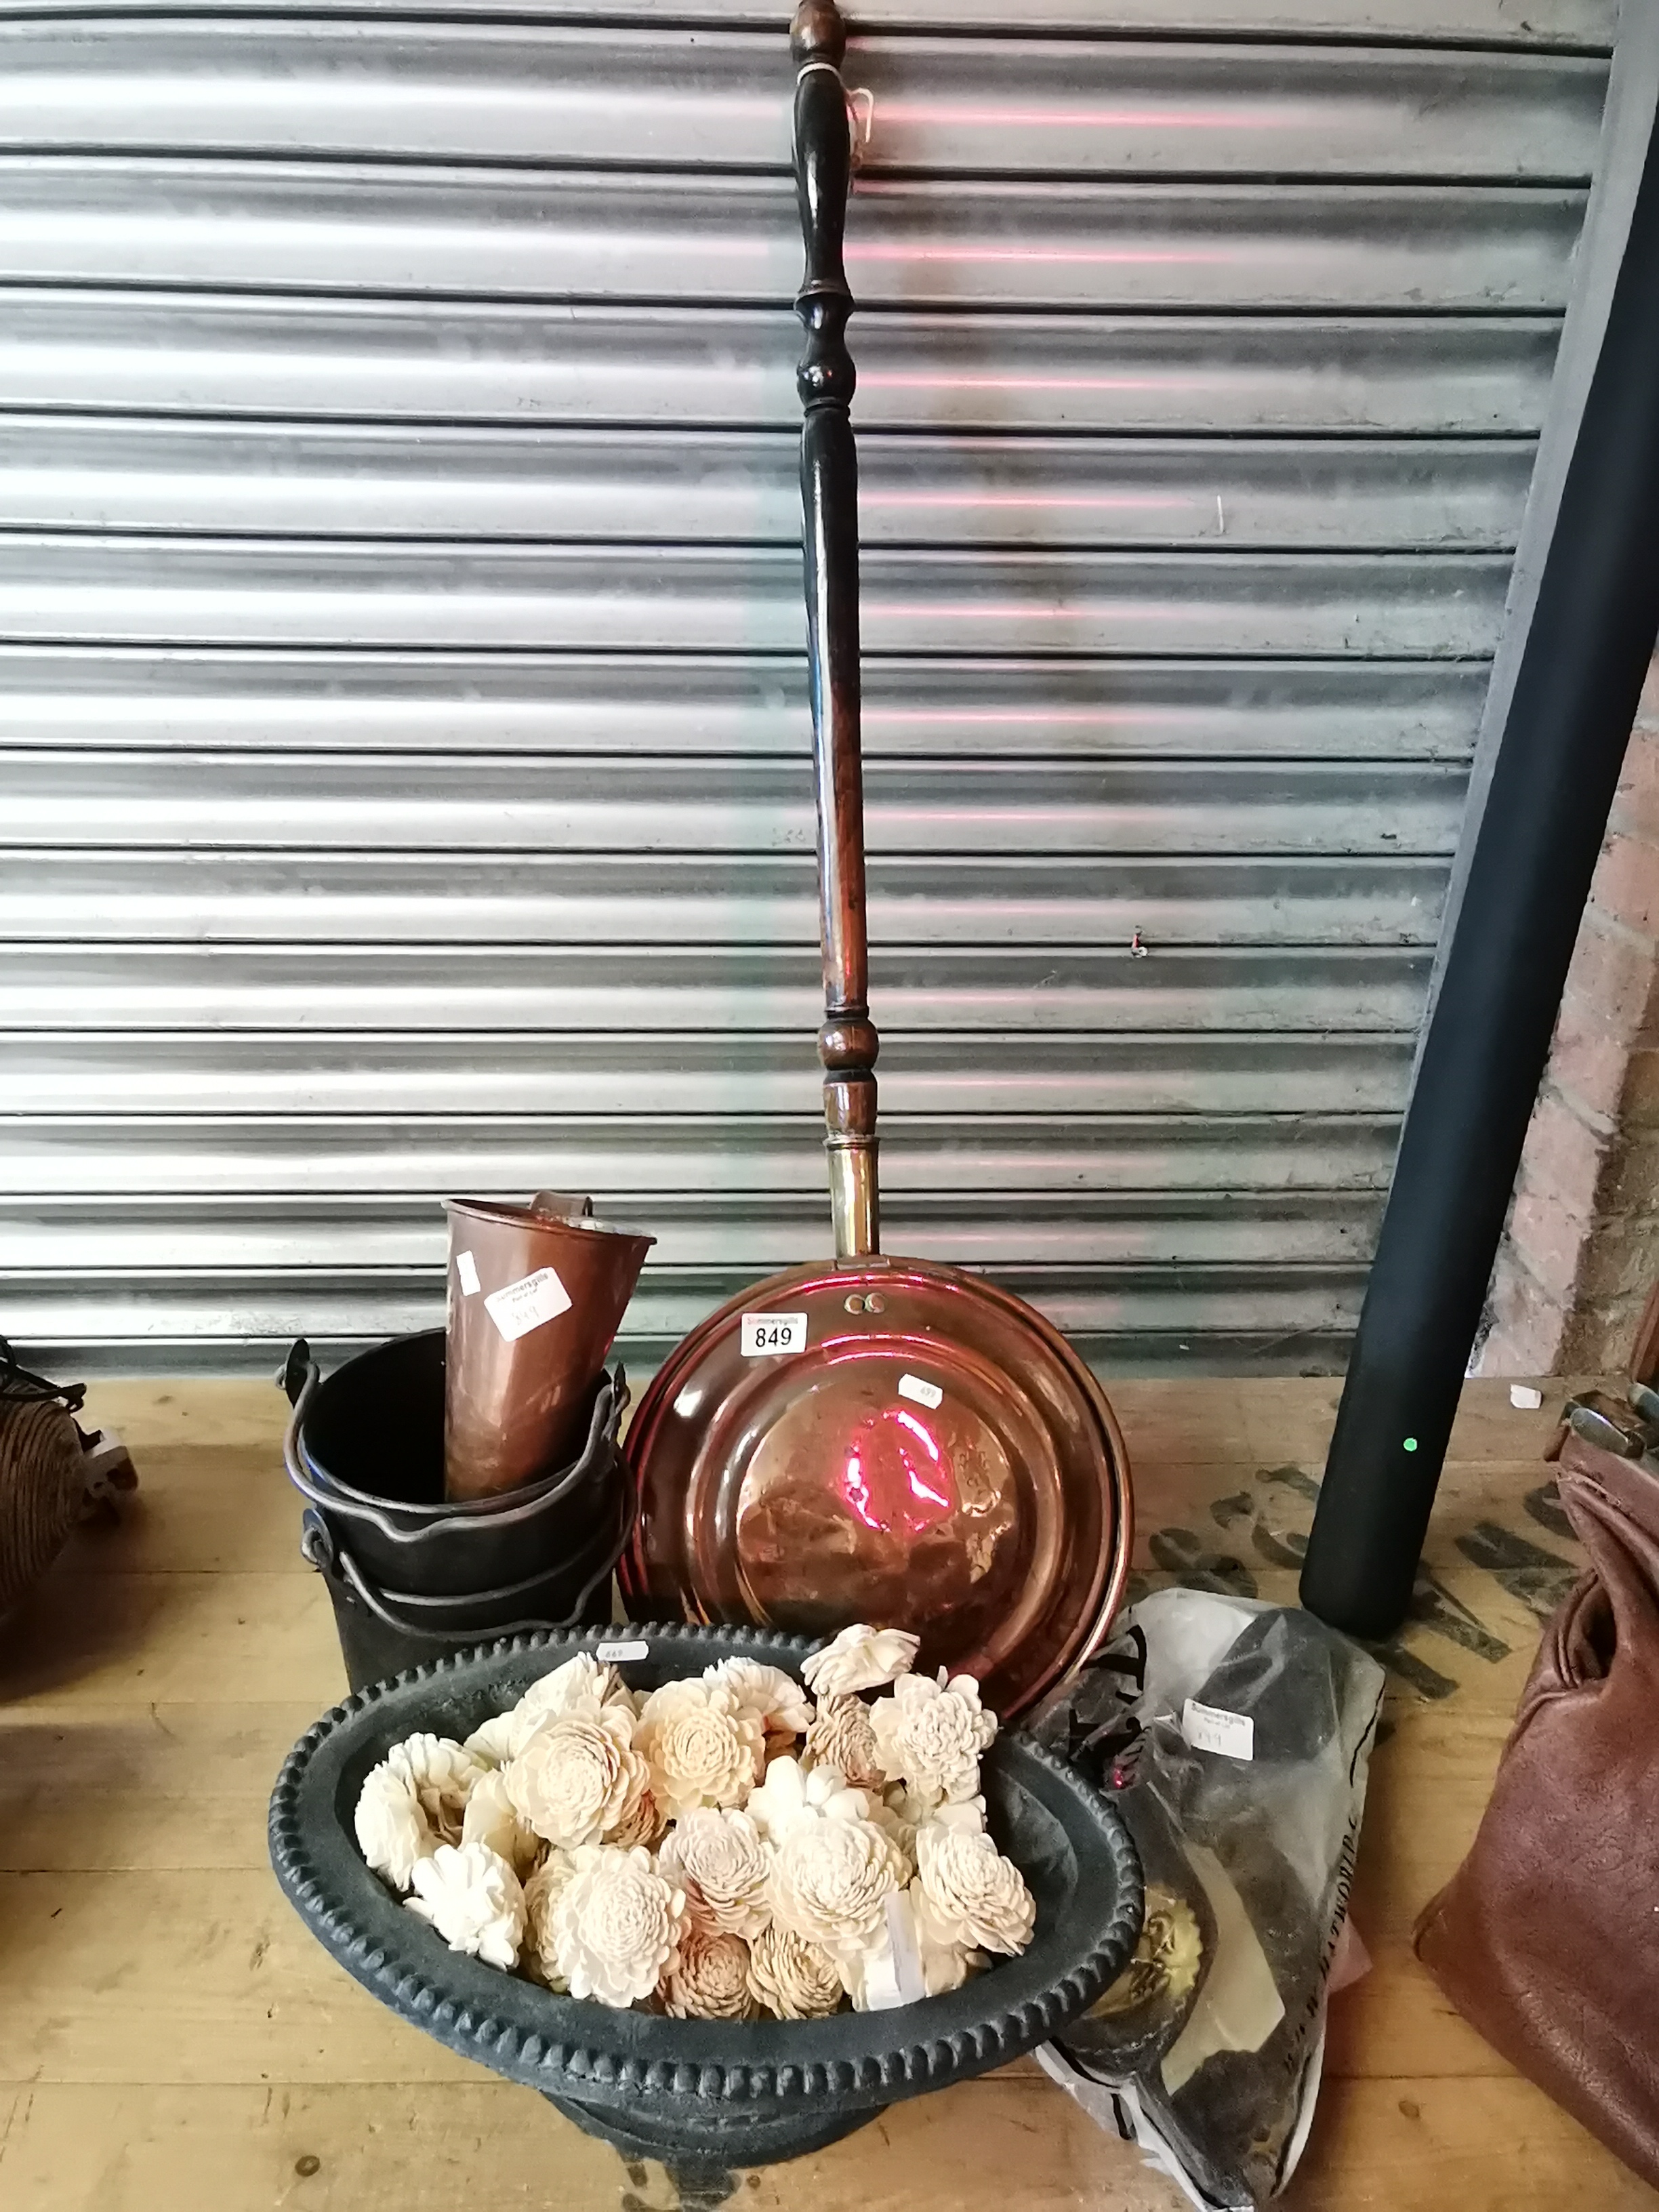 Warming pan, Copper items, horse brasses and lead vase